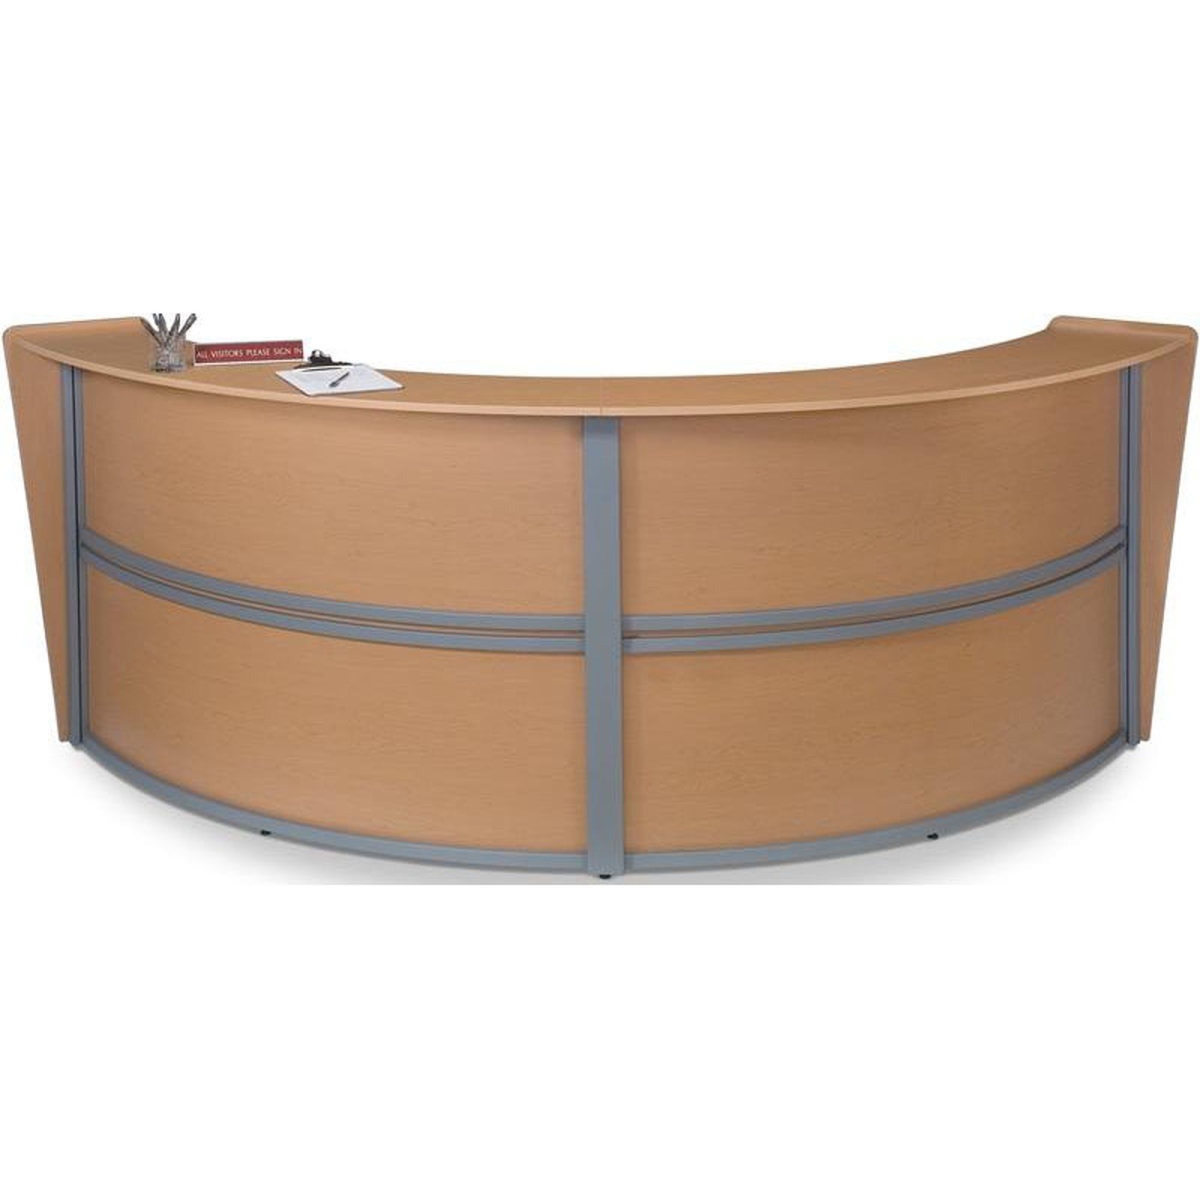 55292-mpl Double Unit Curved Reception Station- Maple